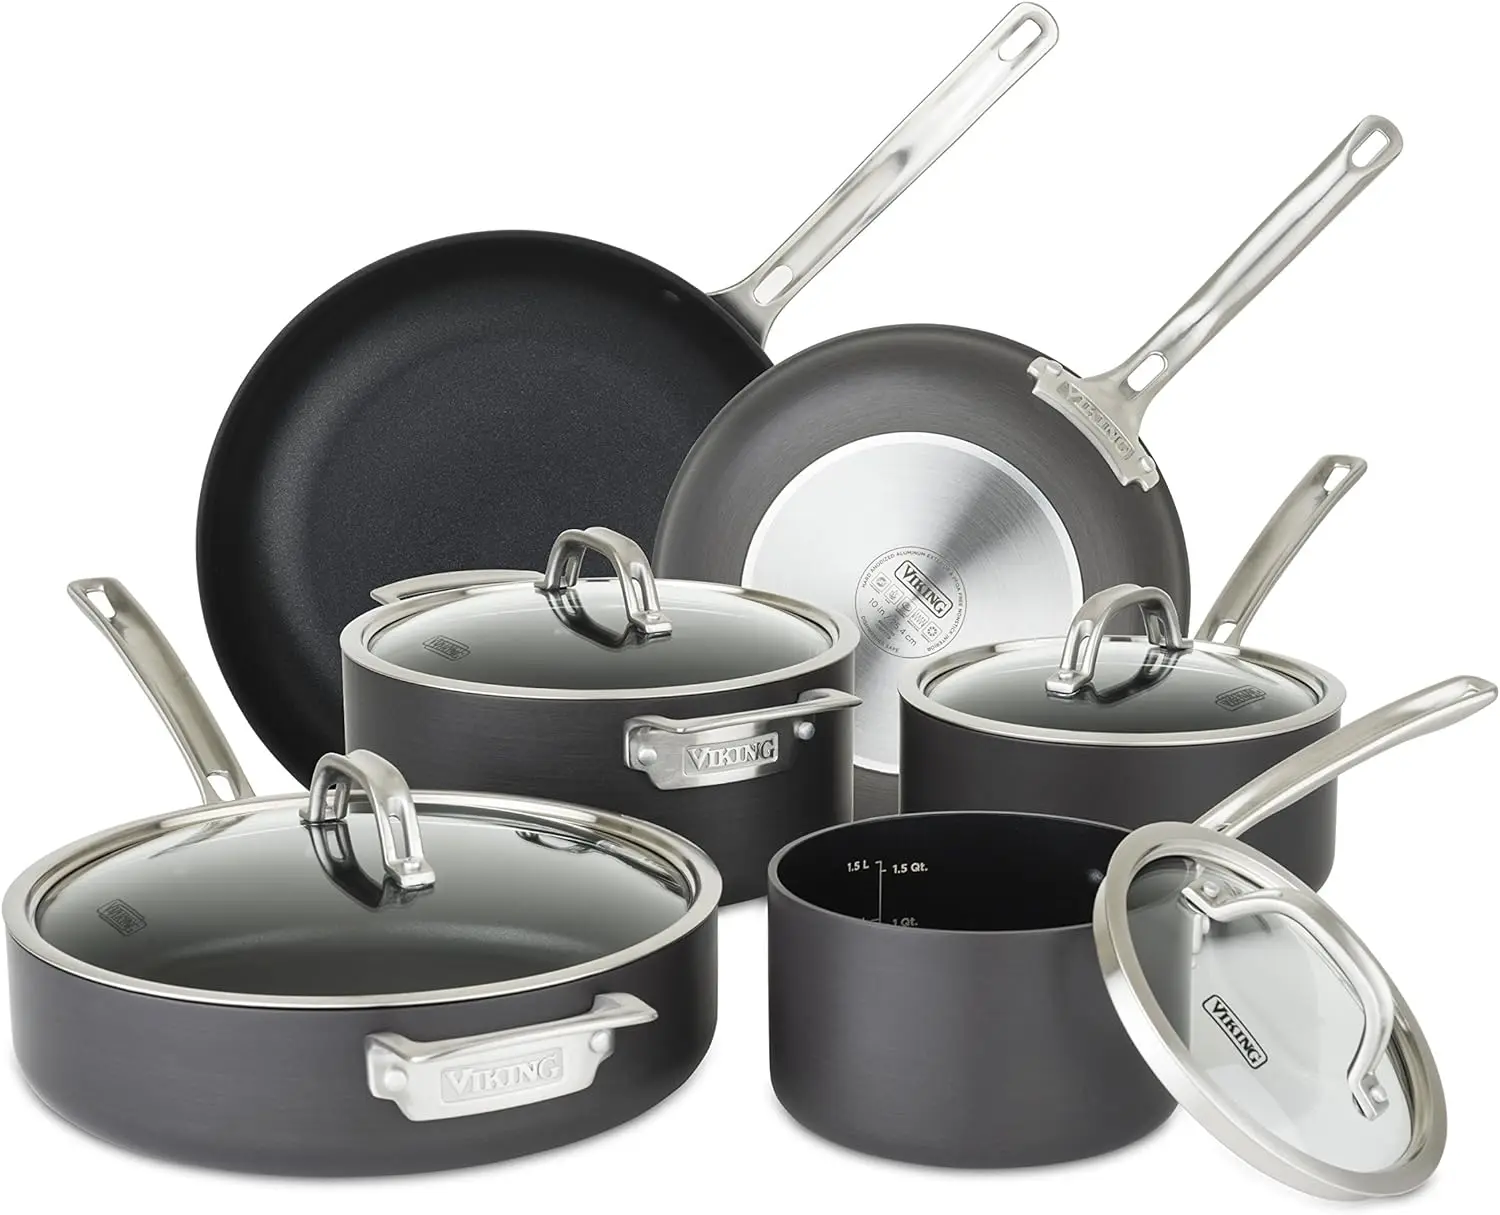 

Hard Anodized Nonstick Cookware Set, 10 Piece, Dishwasher, Oven Safe, Works on All Cooktops including Induction Plate for cookin